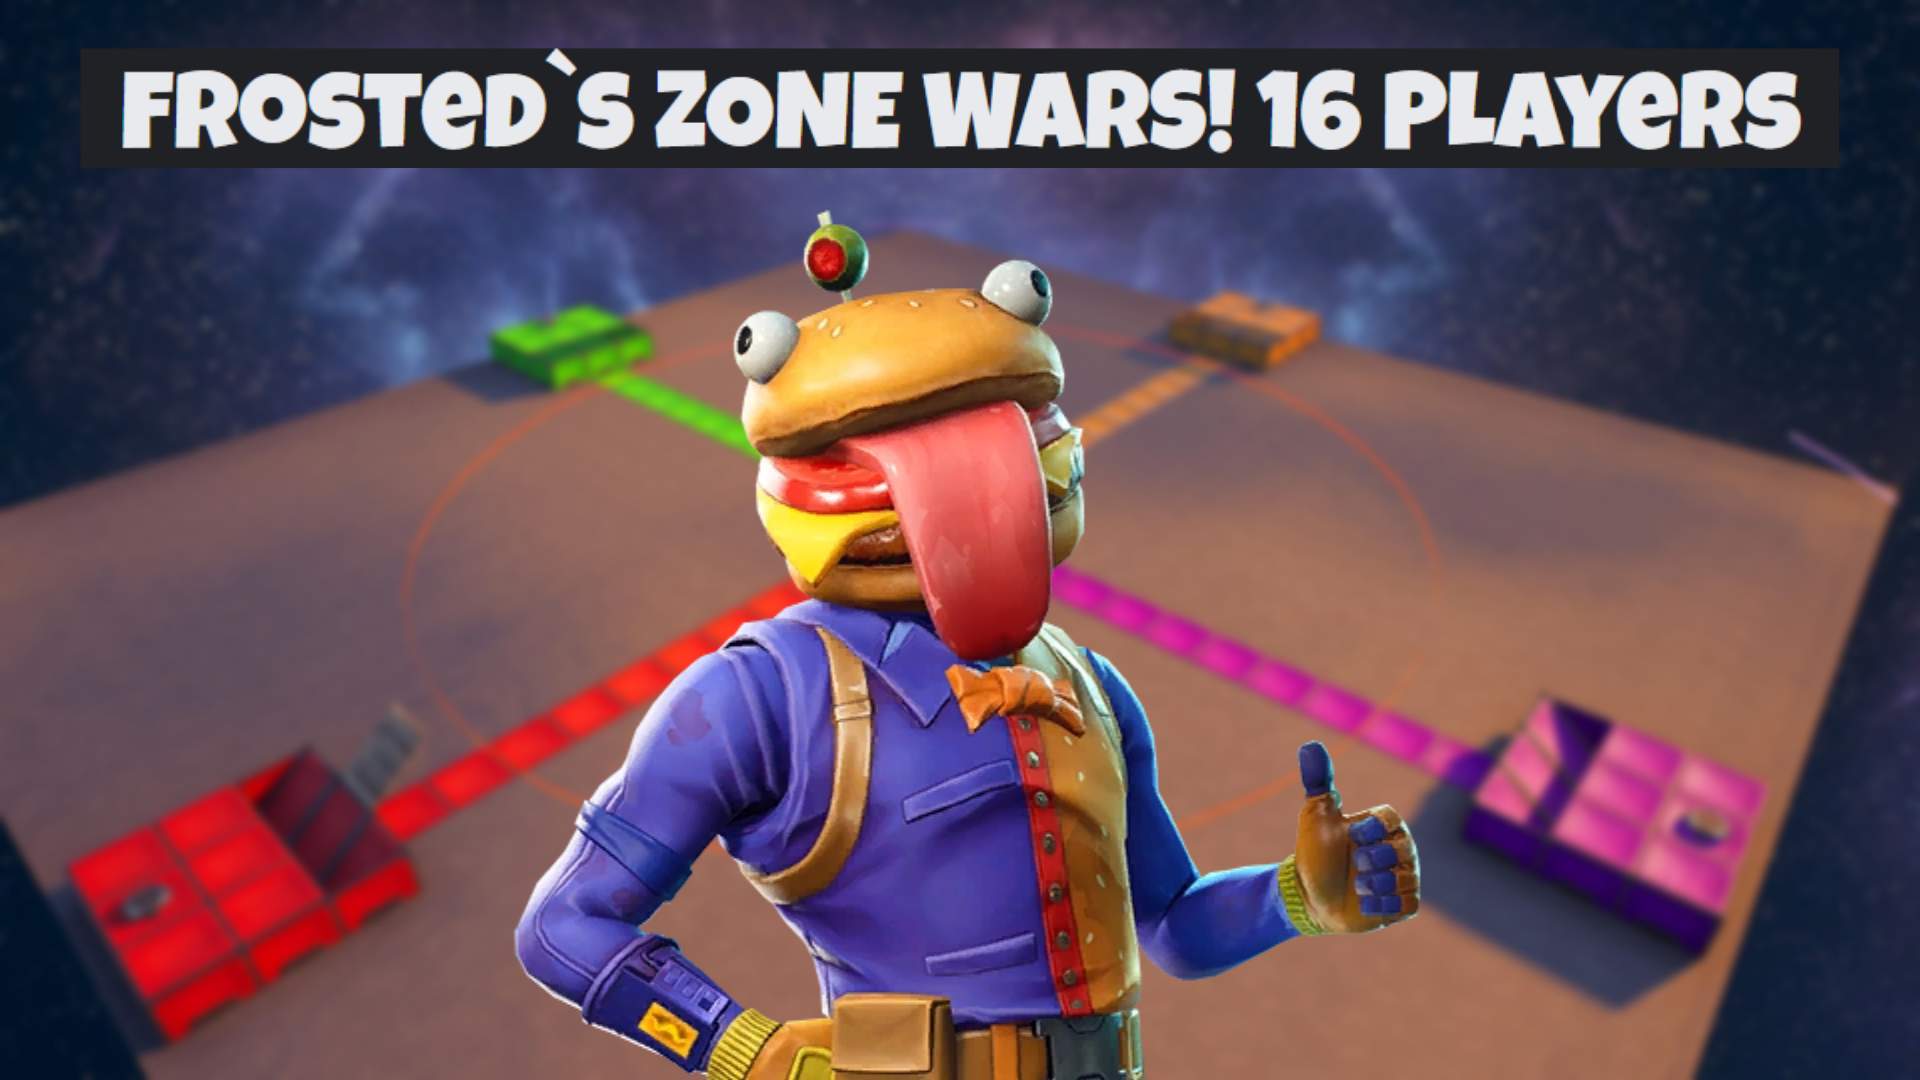 FROSTED'S ZONE WARS 16 PLAYERS!